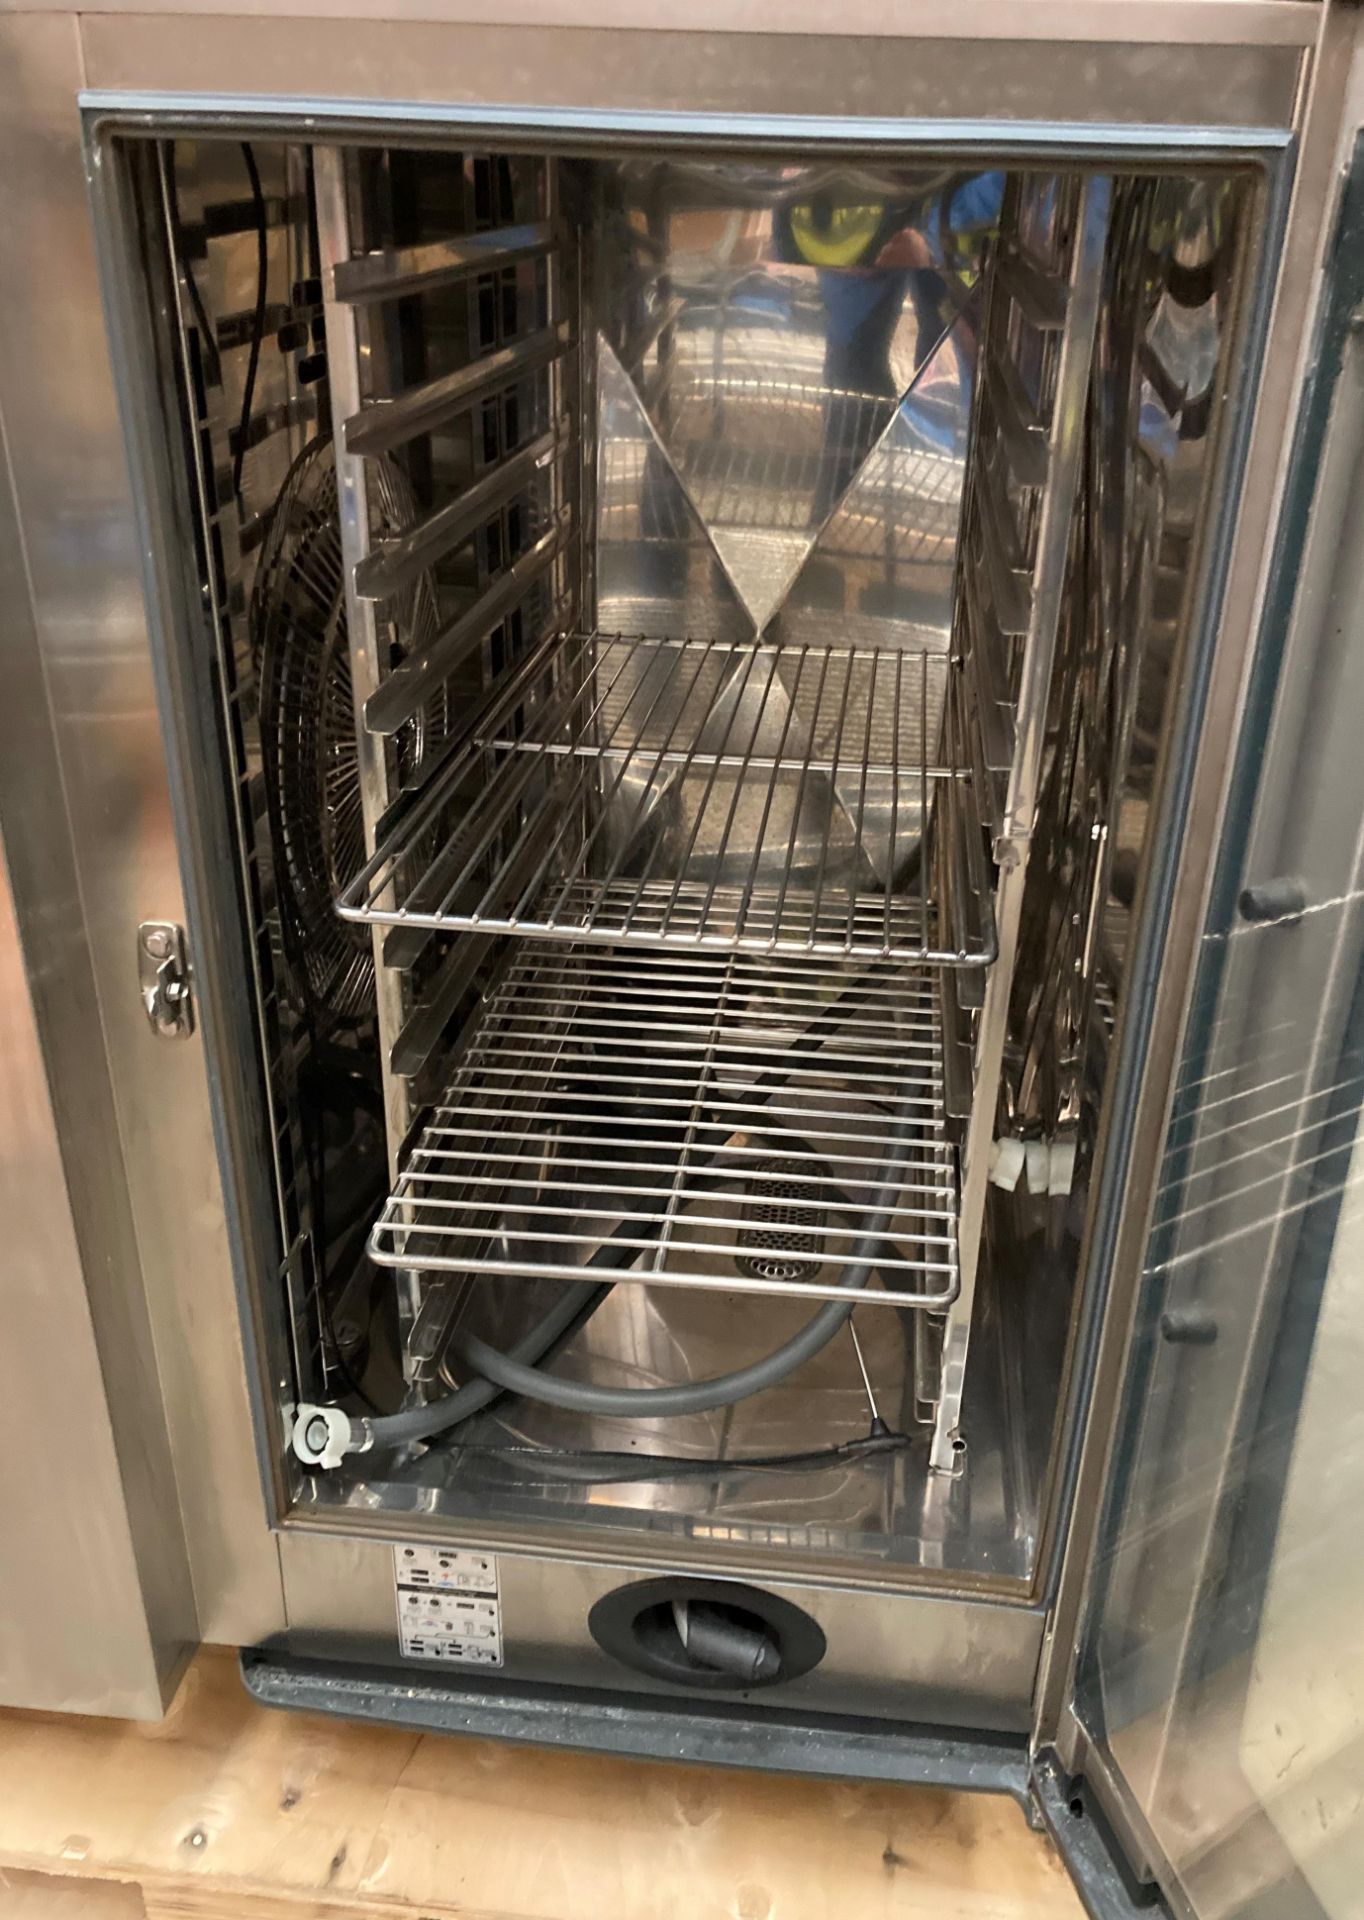 Rational combi master plus stainless steel commercial oven on stand model CMP101 18. - Image 3 of 6